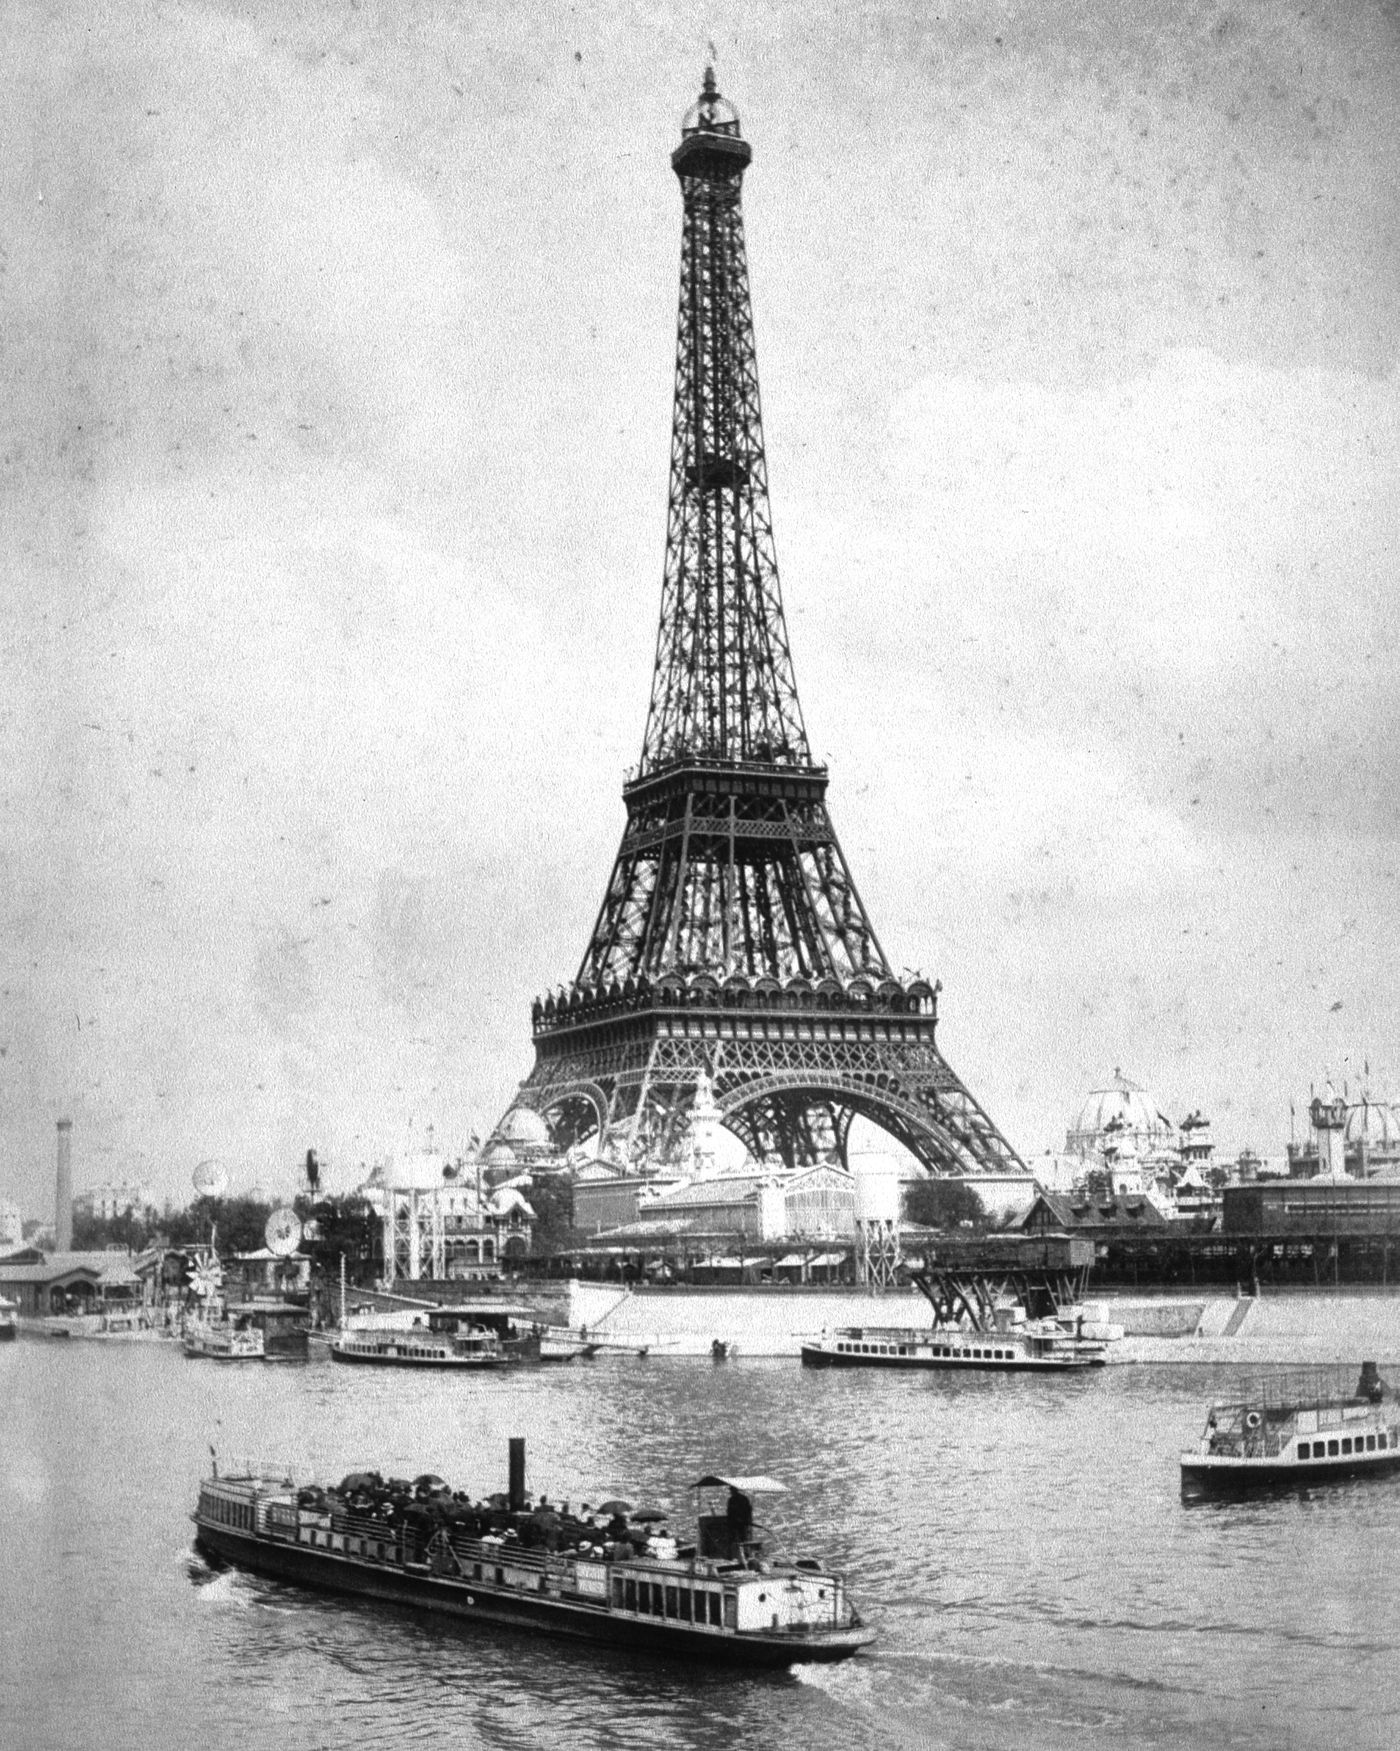 Exposition universelle de 1889 (Paris, France): View of the Eiffel Tower and exposition buildings from across the river